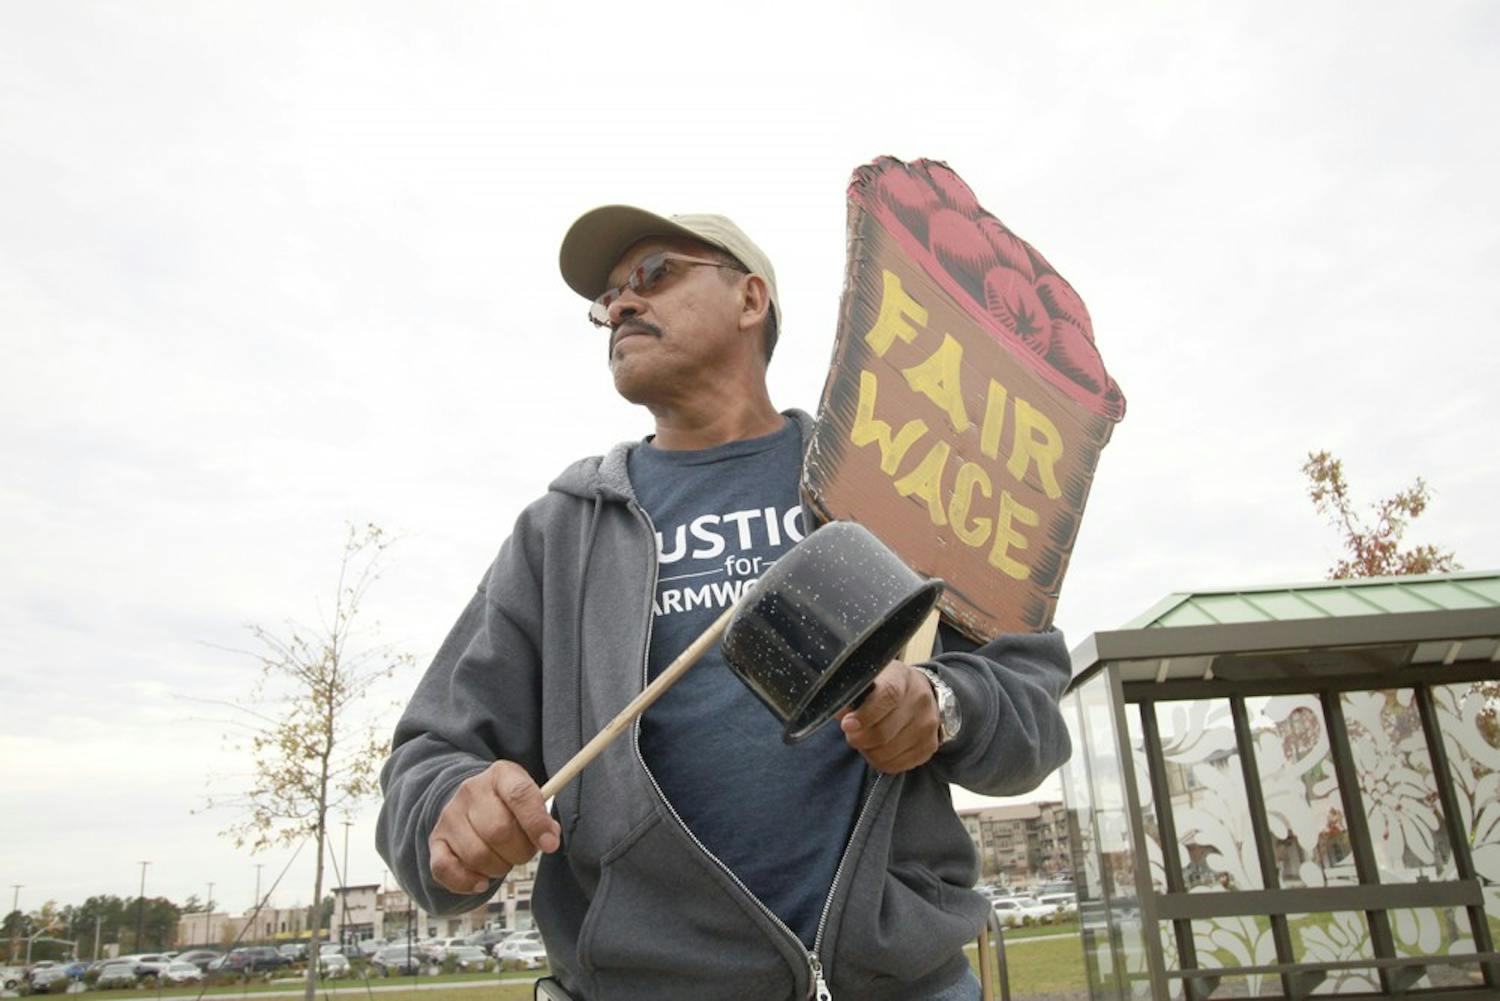 CIW farmer Santiago Perez holds signs in protest at the Cary Publix. The workers are fighting for fairer wages and produce prices.